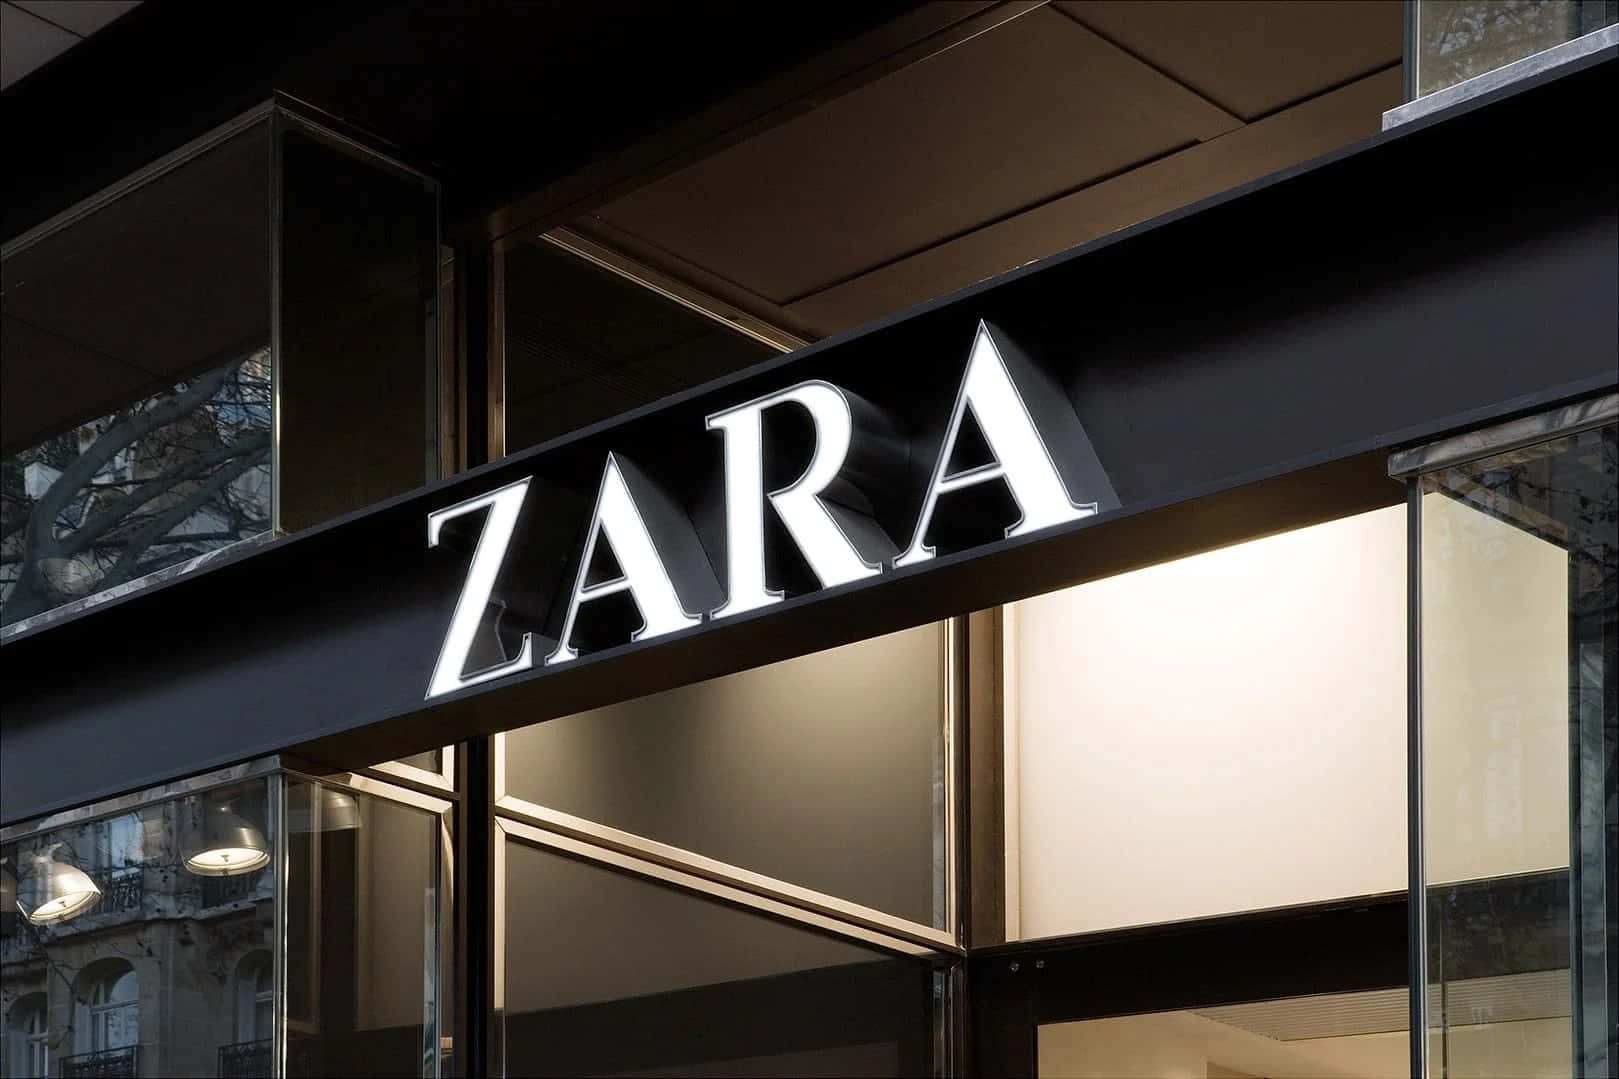 Newest Clothing Designs from Zara